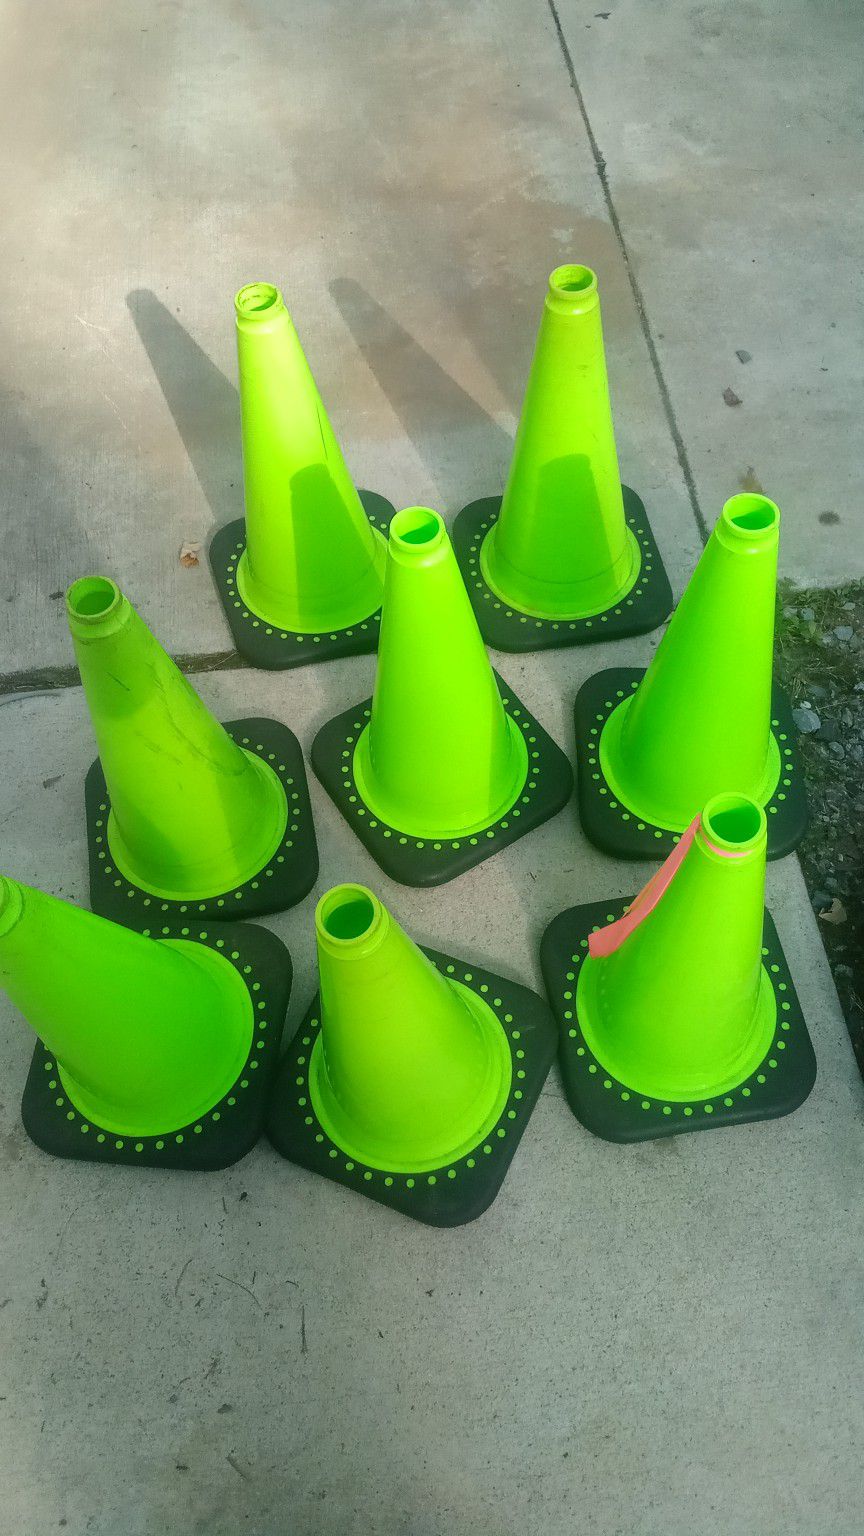 11 Traffic Cones ... 8 Smaller Ones And 3 Big Style